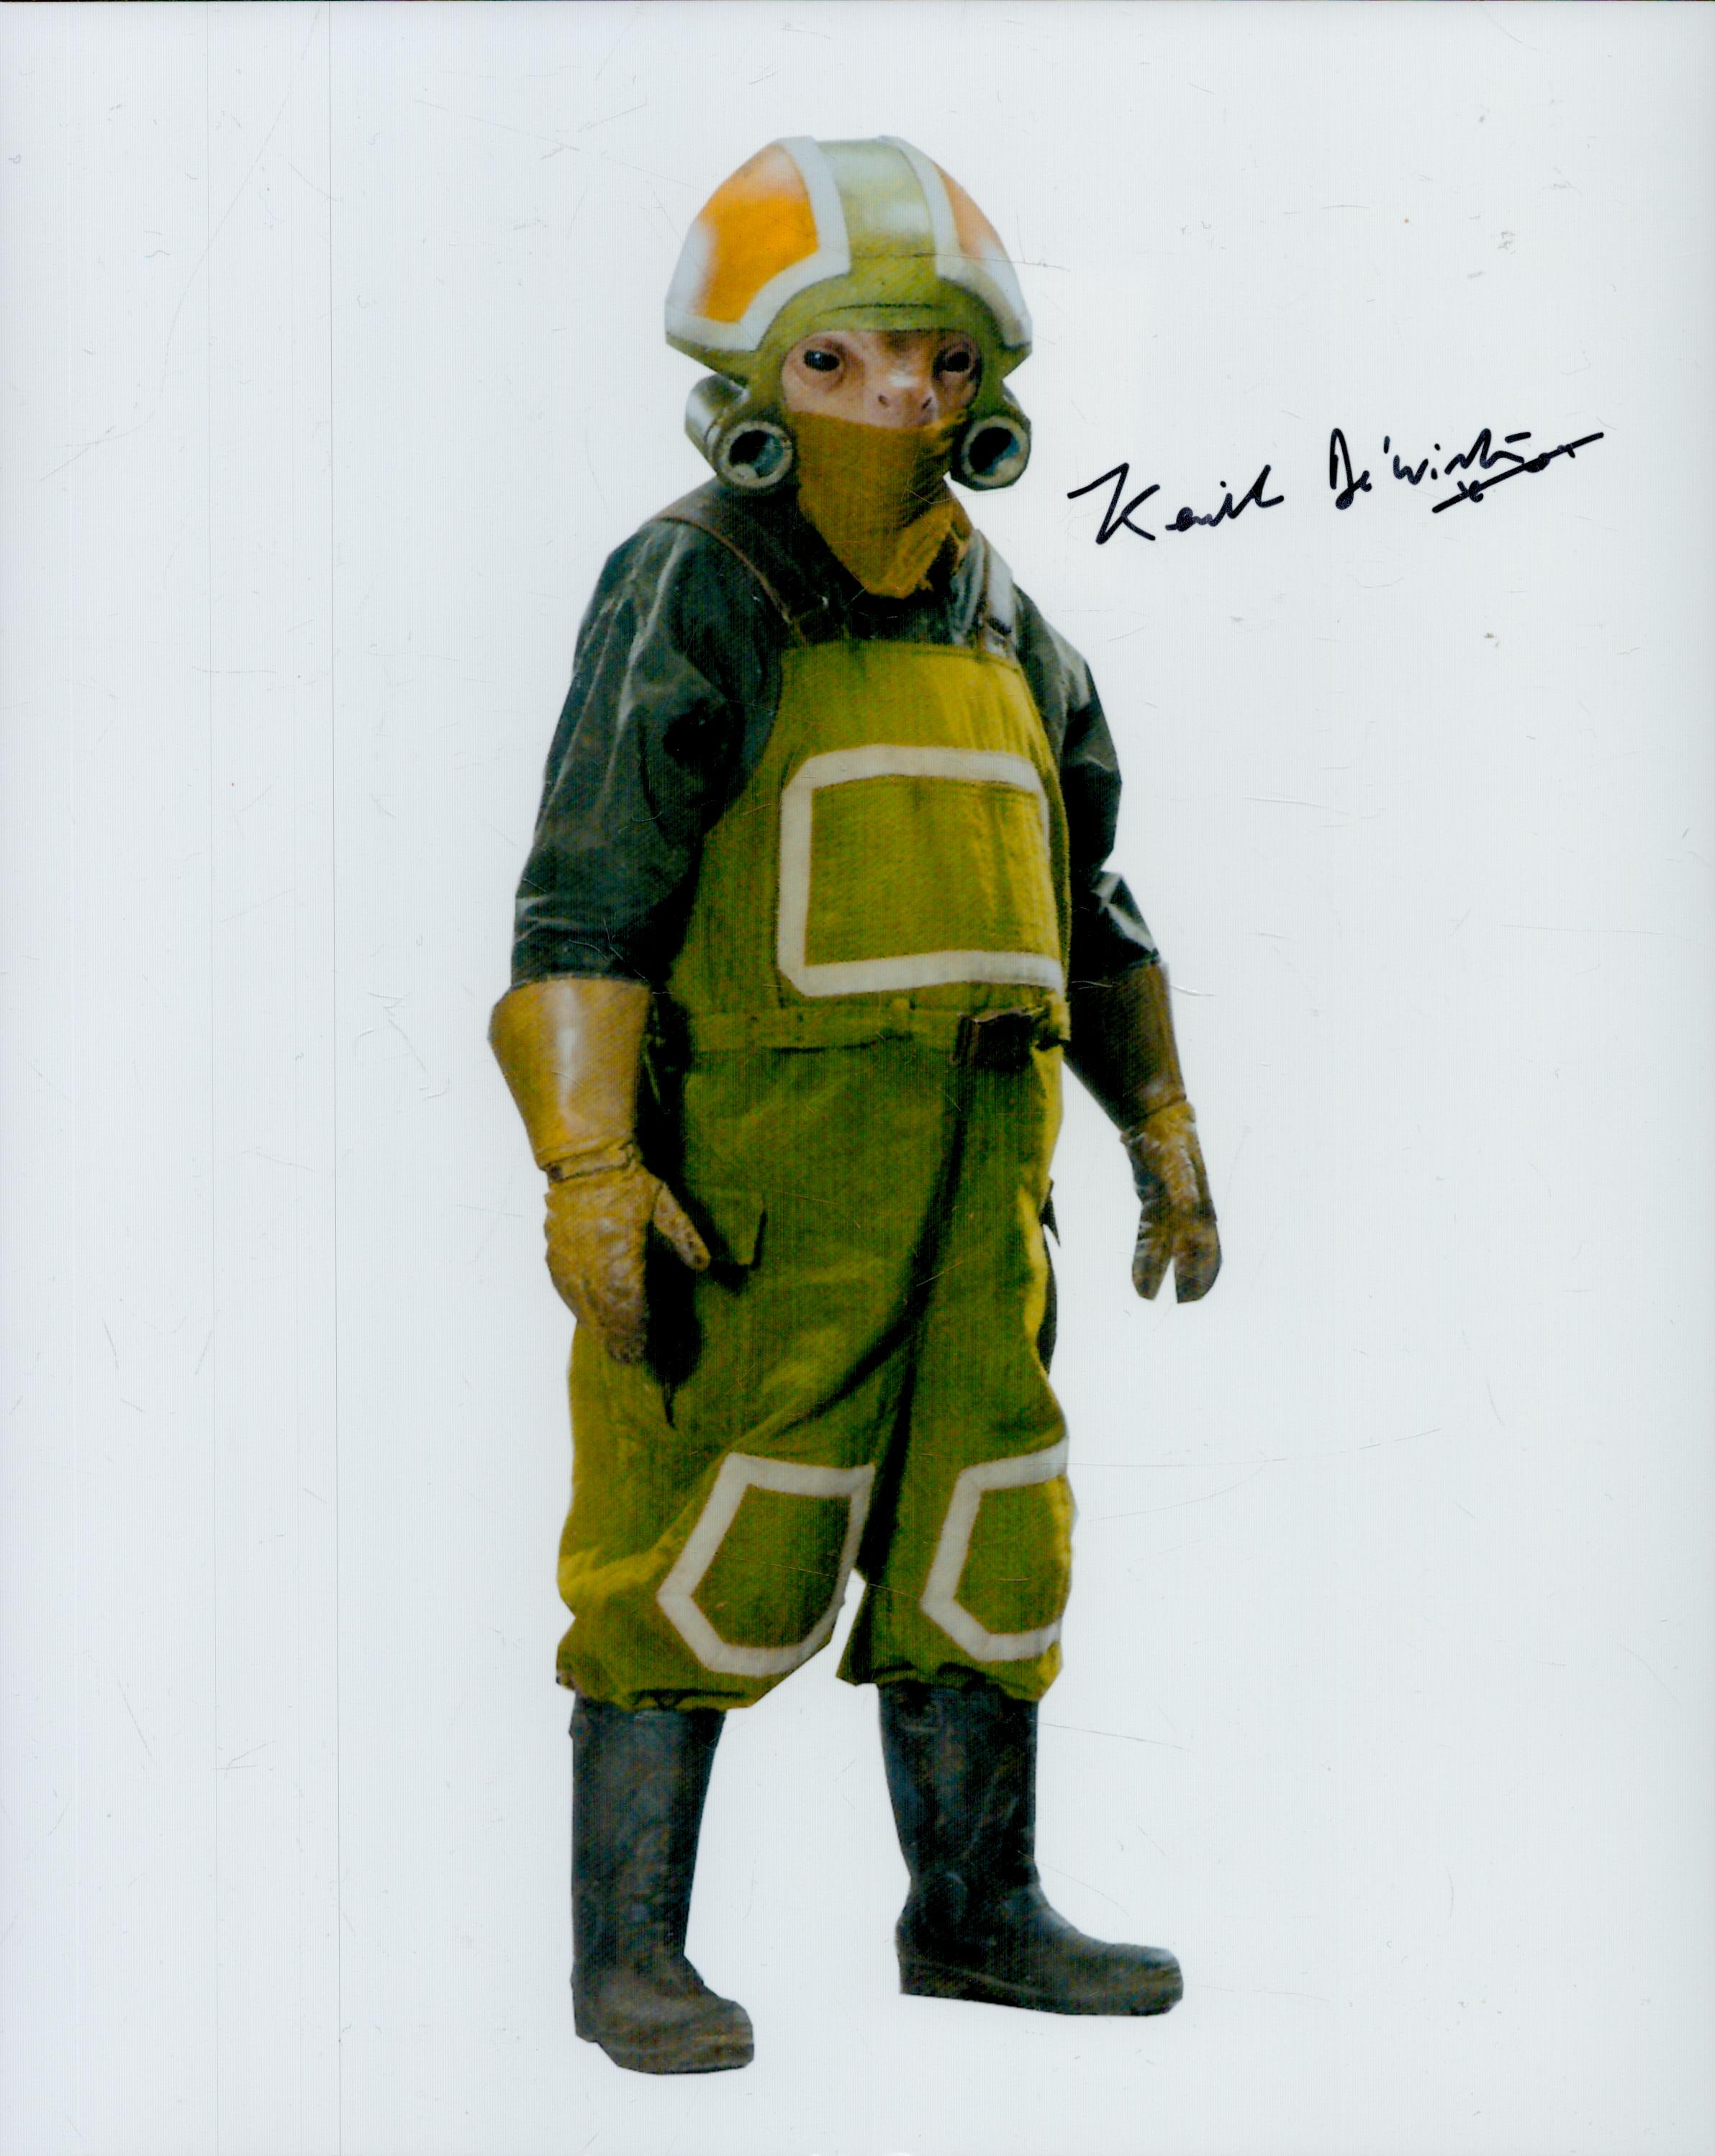 Keith De Winter signed 10x8 inch Star Wars colour photo. Good Condition. All autographs come with